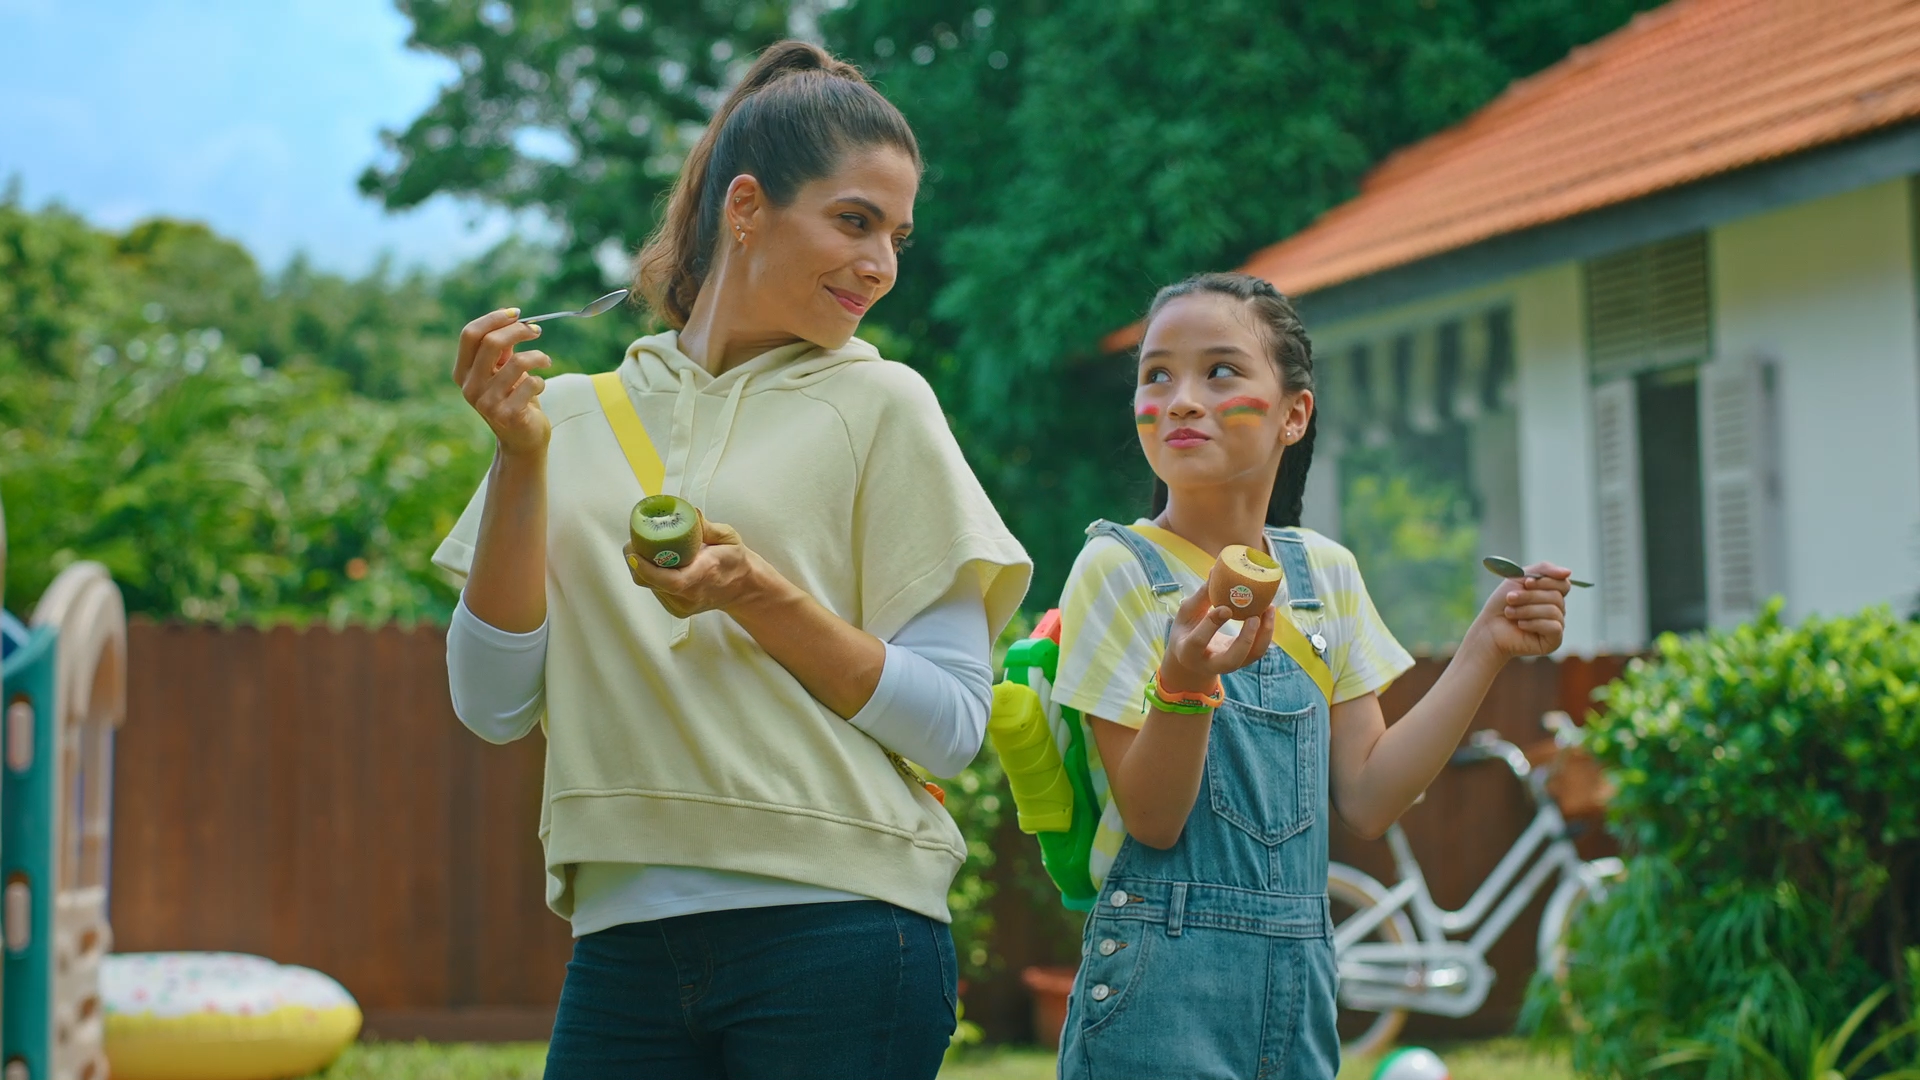 Zespri Kiwi ↳ A spot to show the first time moms allow kids to play with waterguns during a windy cloudy day.